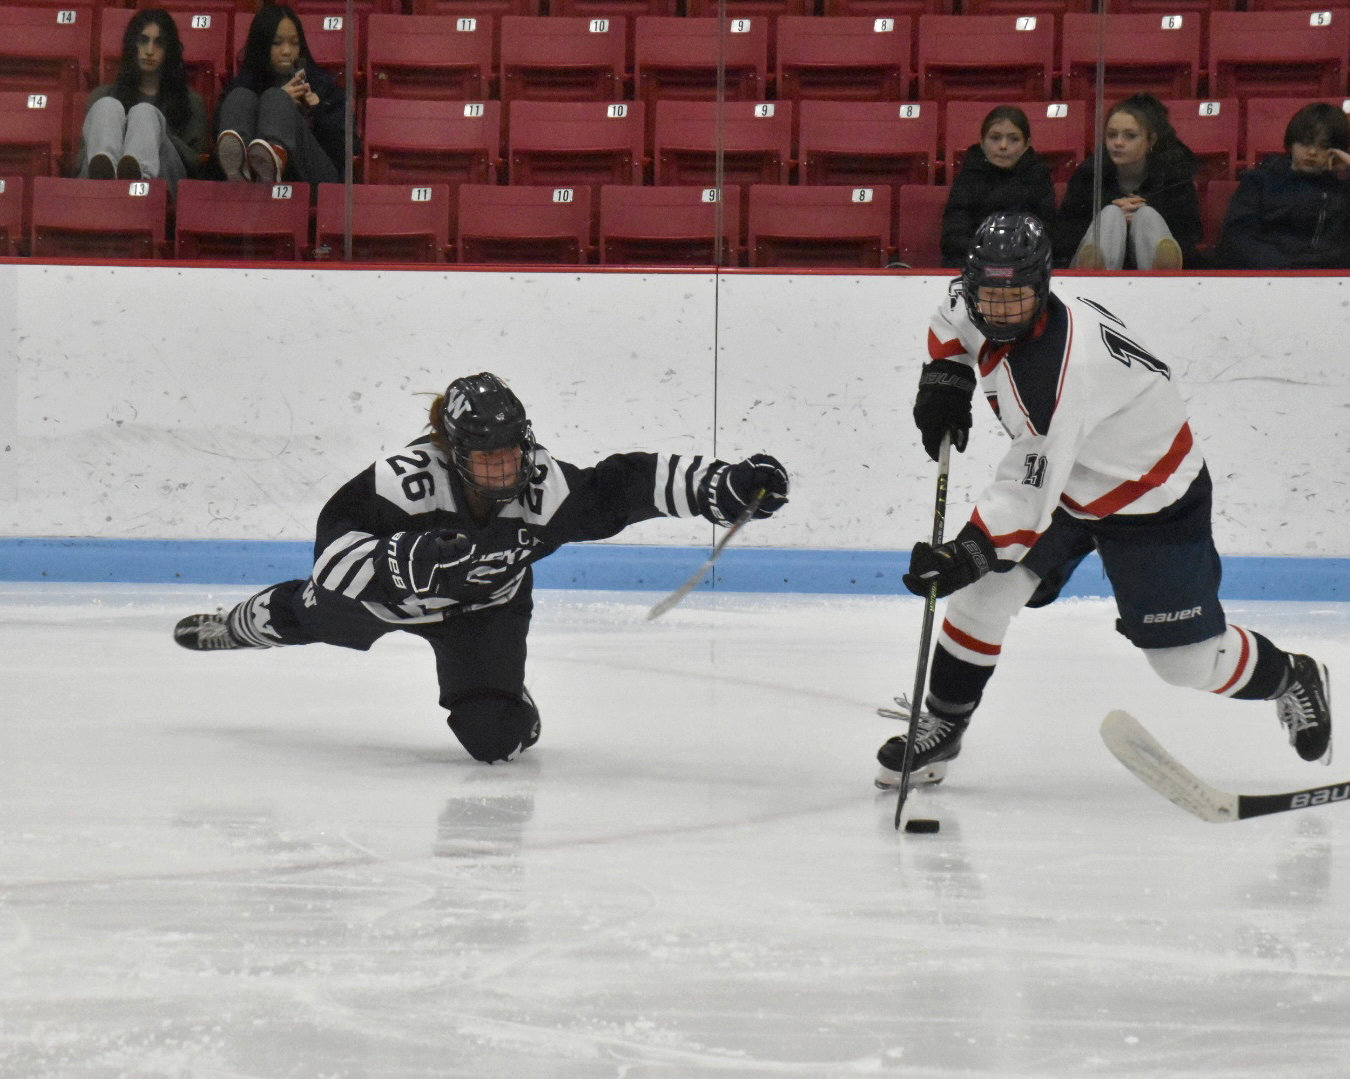 Claire Misurelli dives for a poke check during the Whalers 5-3 loss Thursday against Brookline.